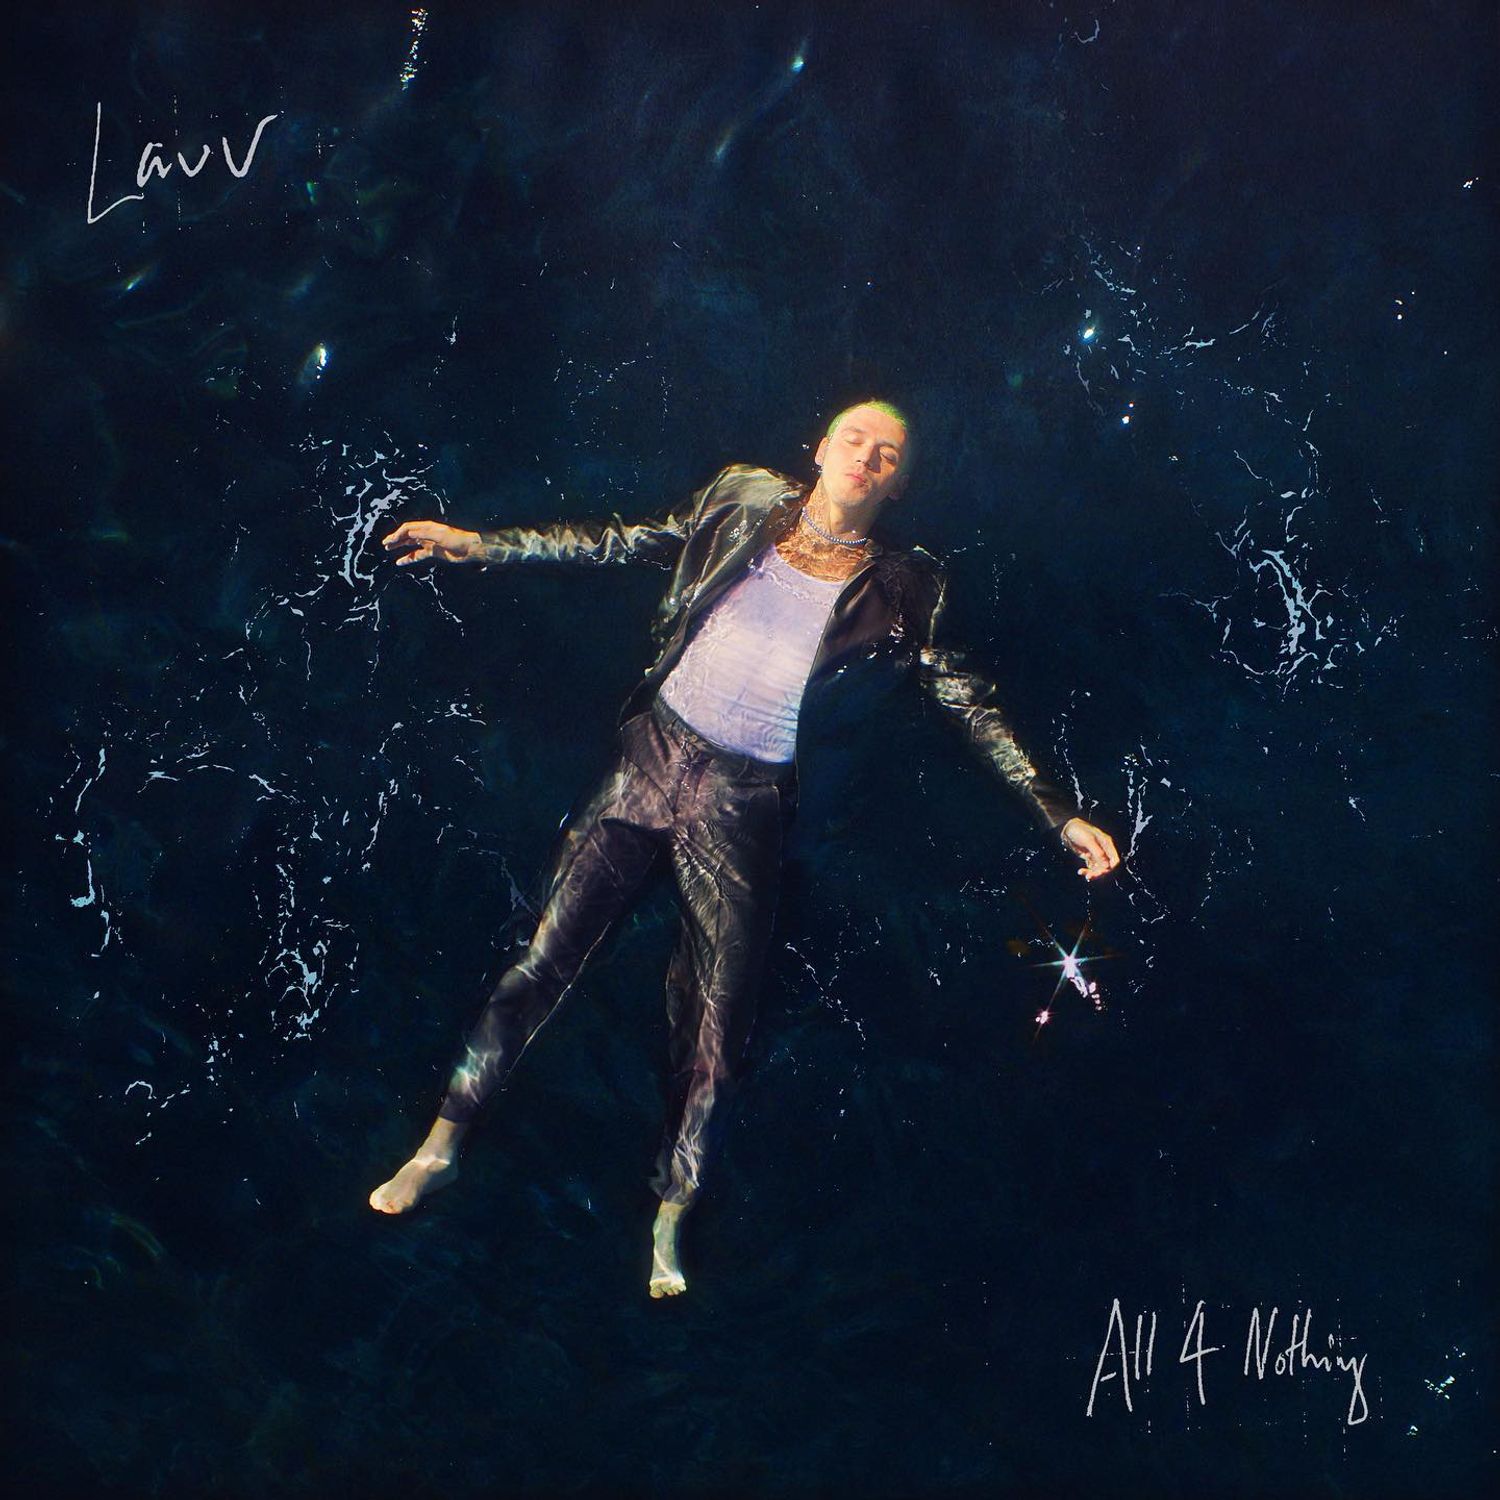 Lauv - All 4 nothing